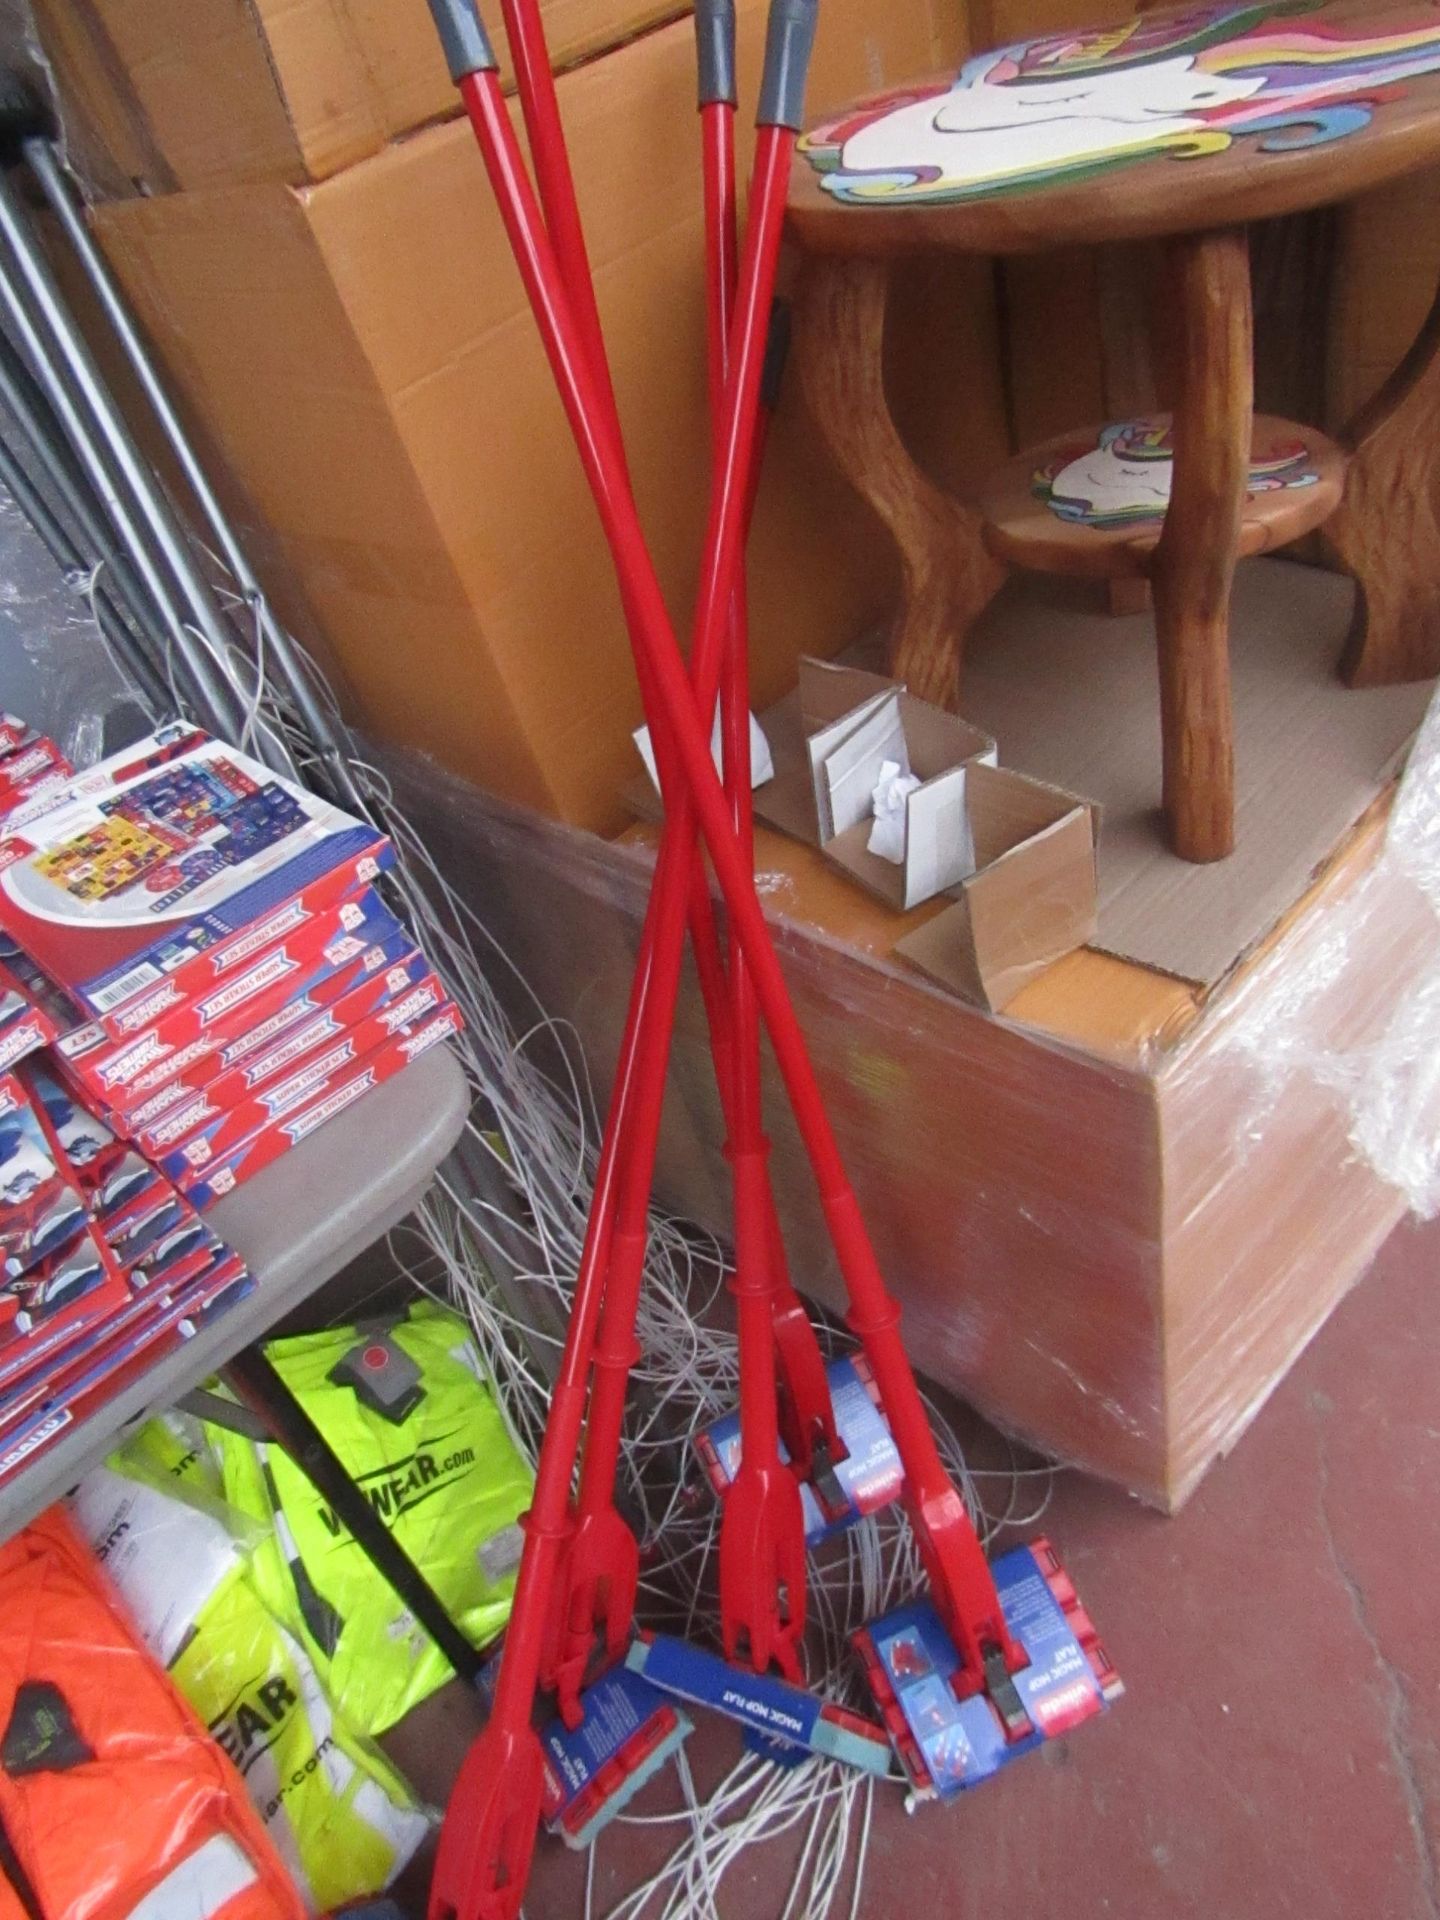 5X MAGIC MOP FLAT, NEW IN PACKAGE. SEE PICTURE.